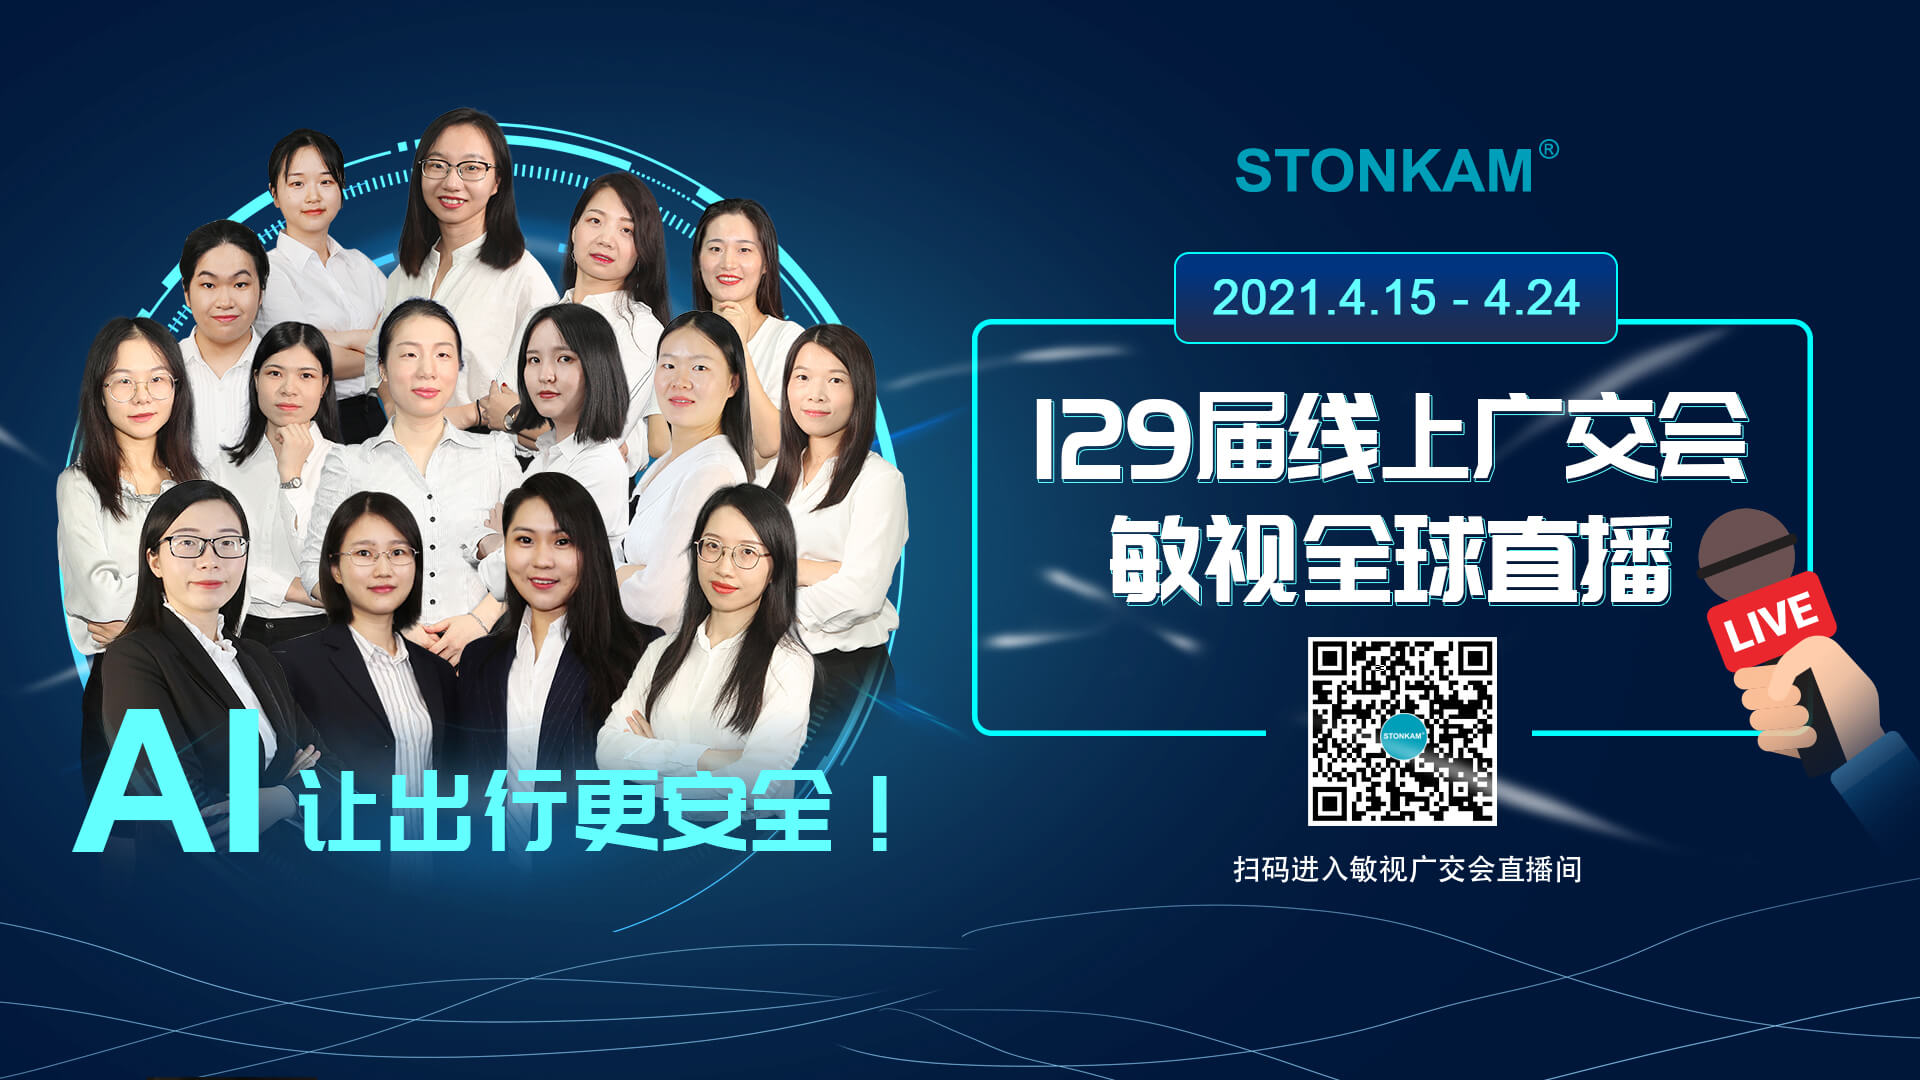 The 129th Canton Fair will be held from April 15th to 24th, STONKAM looks forward to seeing you!